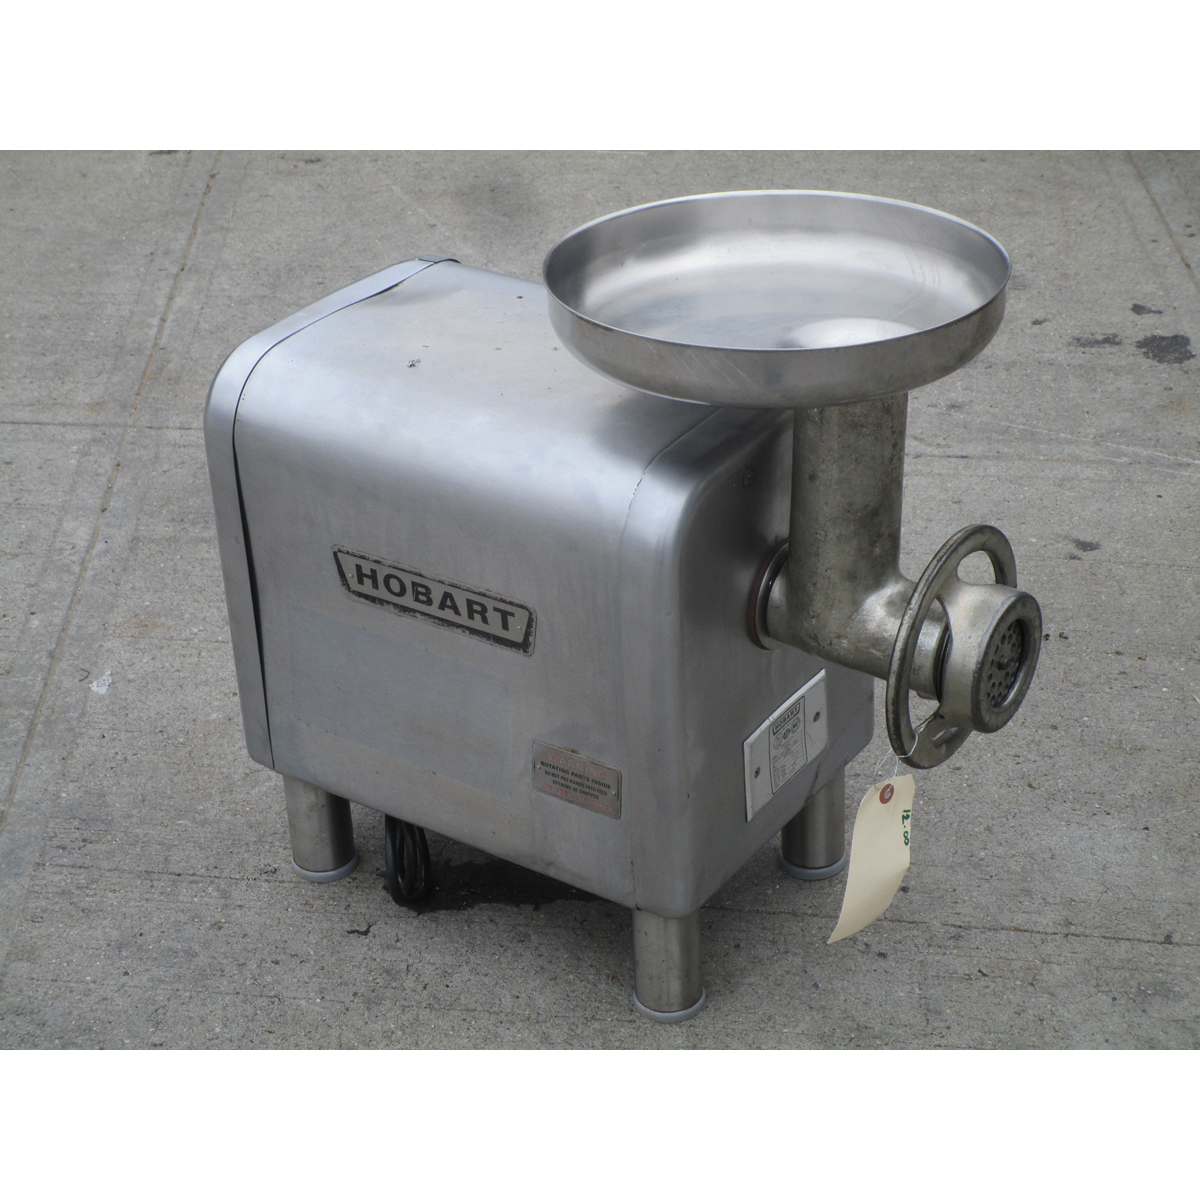 Hobart 4812 Meat Grinder, Used Very Good Condition